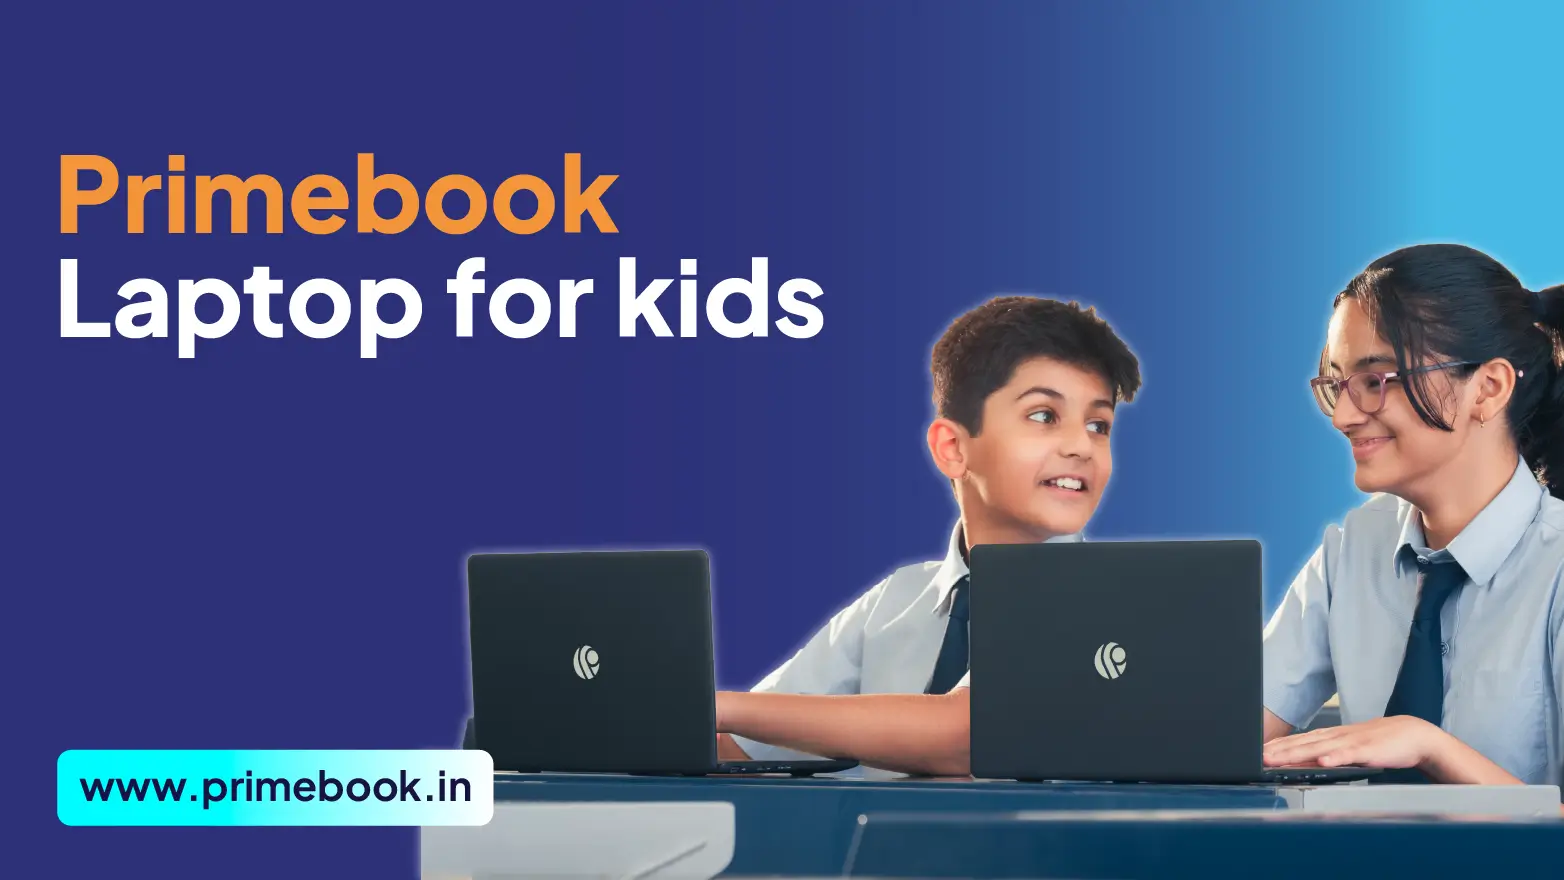 Primebook - Affordable Laptops for Kids in India!